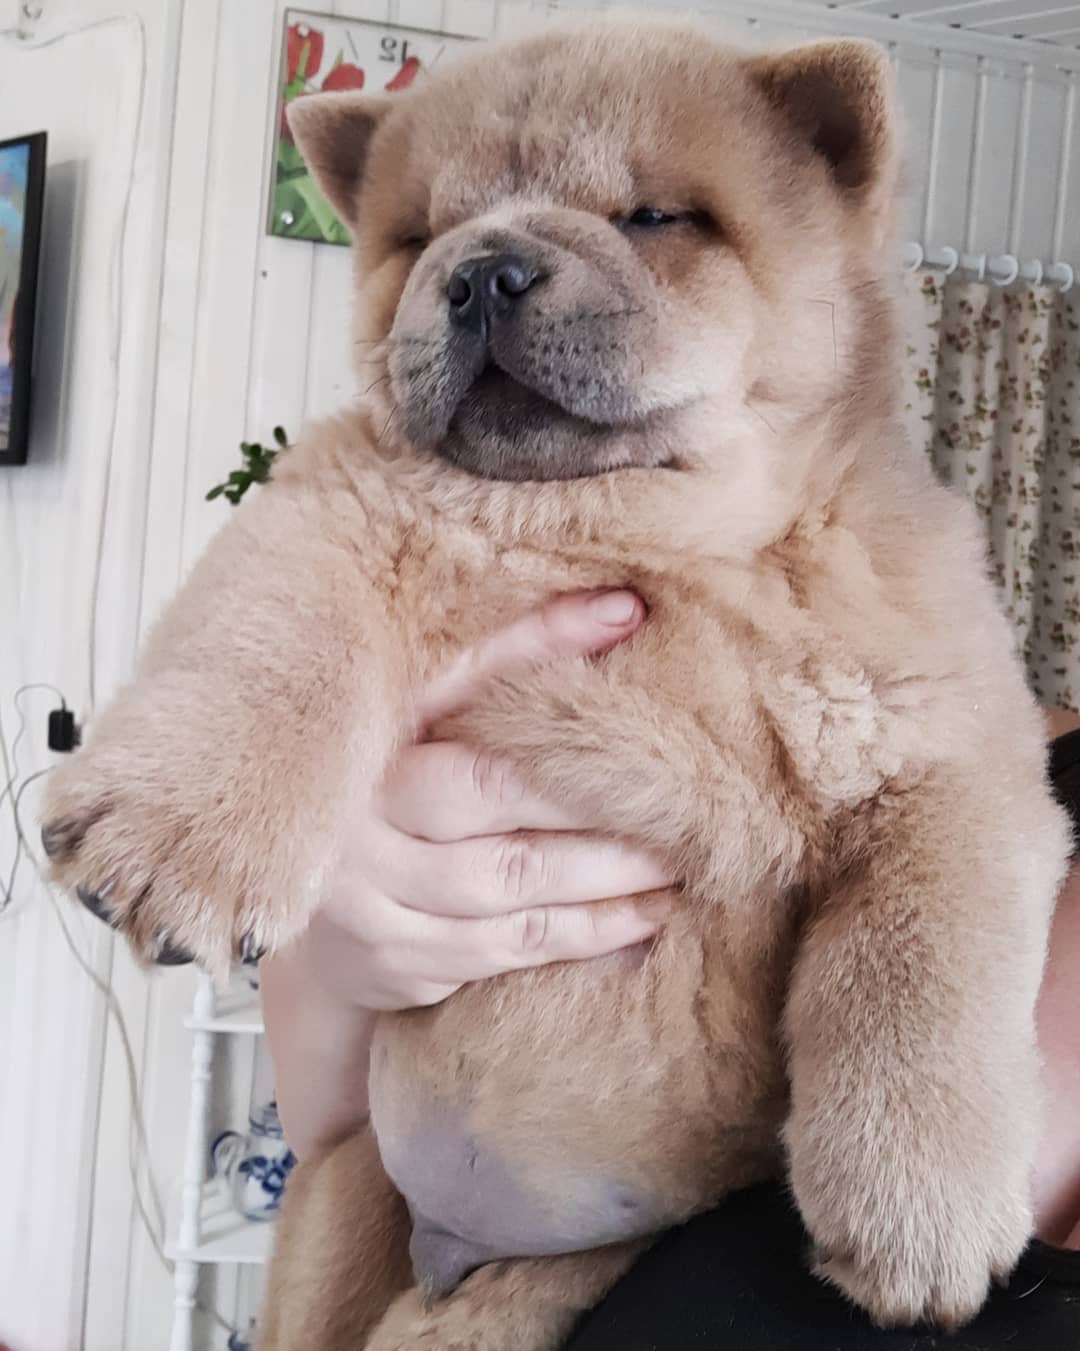 holding up a sleeping Chow Chow puppy